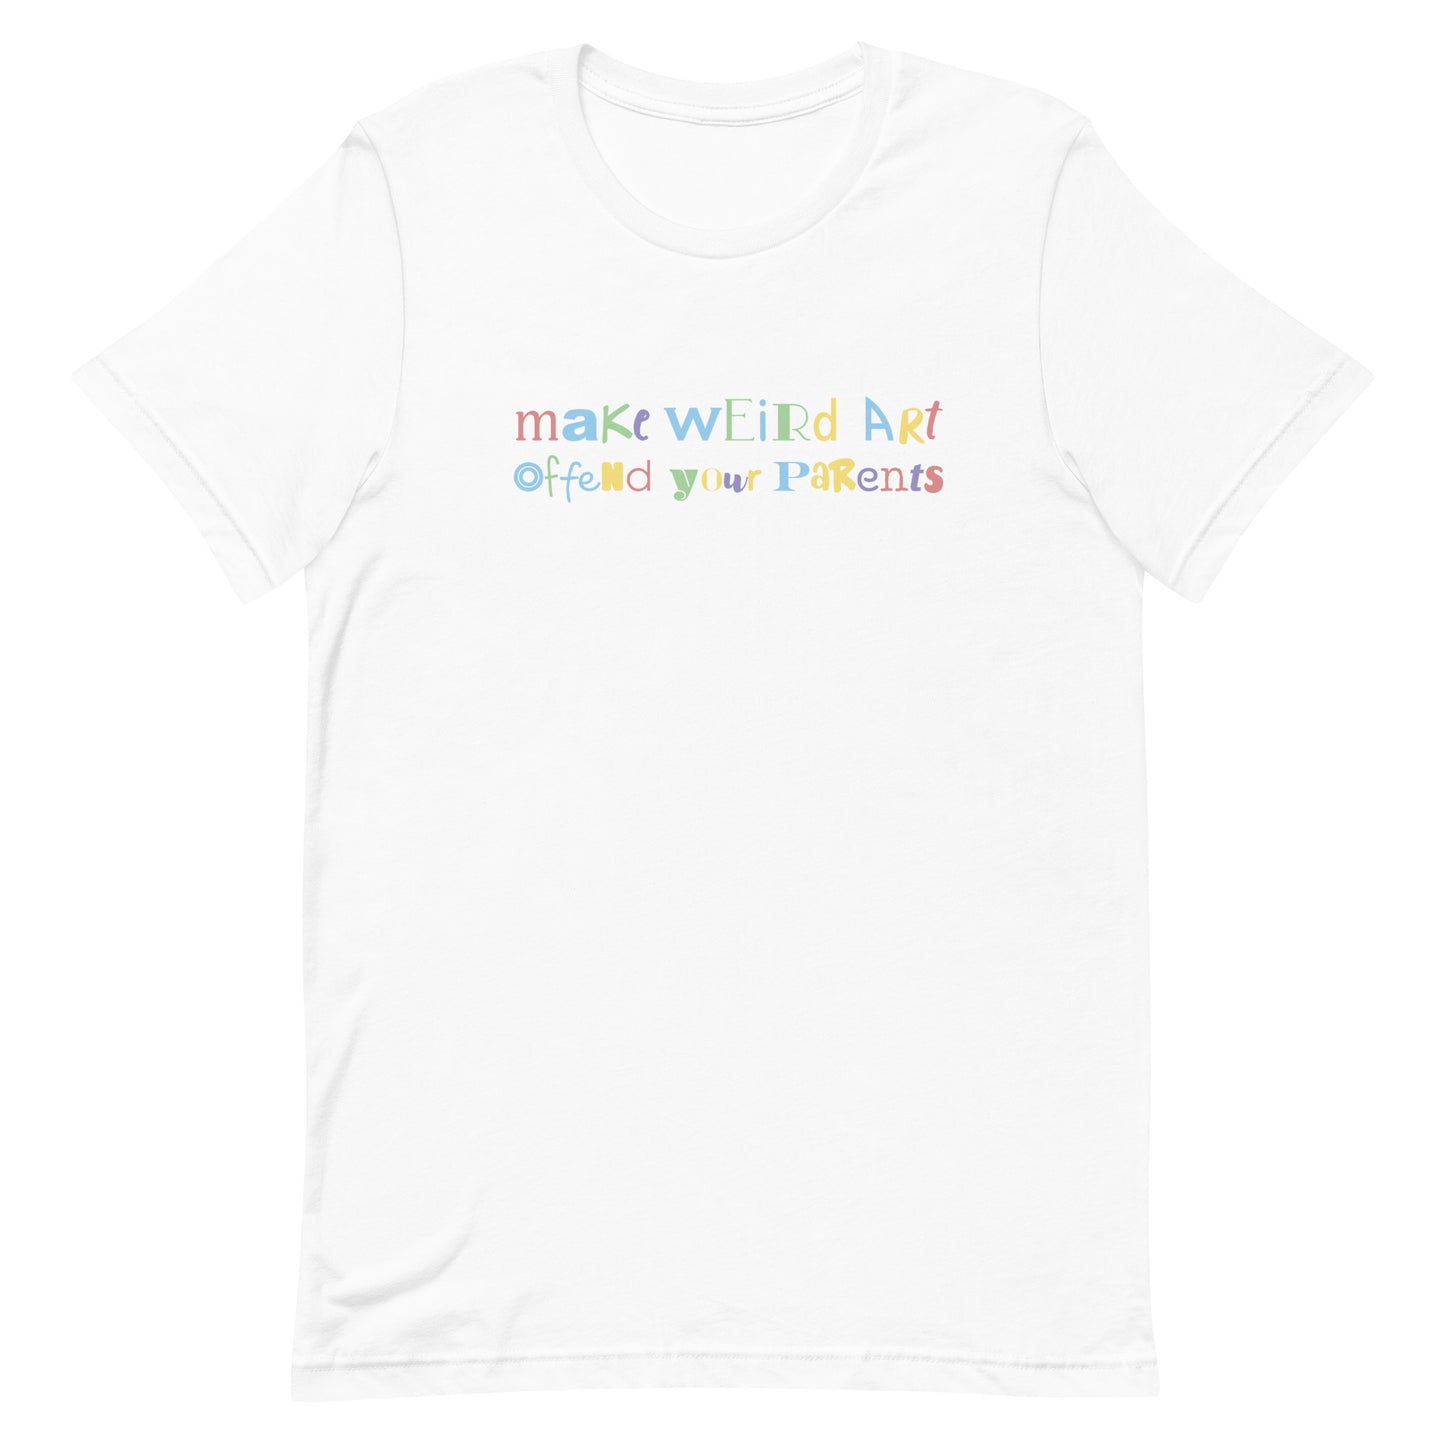 A white crewneck t-shirt with text that reads "make weird art, offend your parents". The text is a scrambled collection of different colors and fonts.